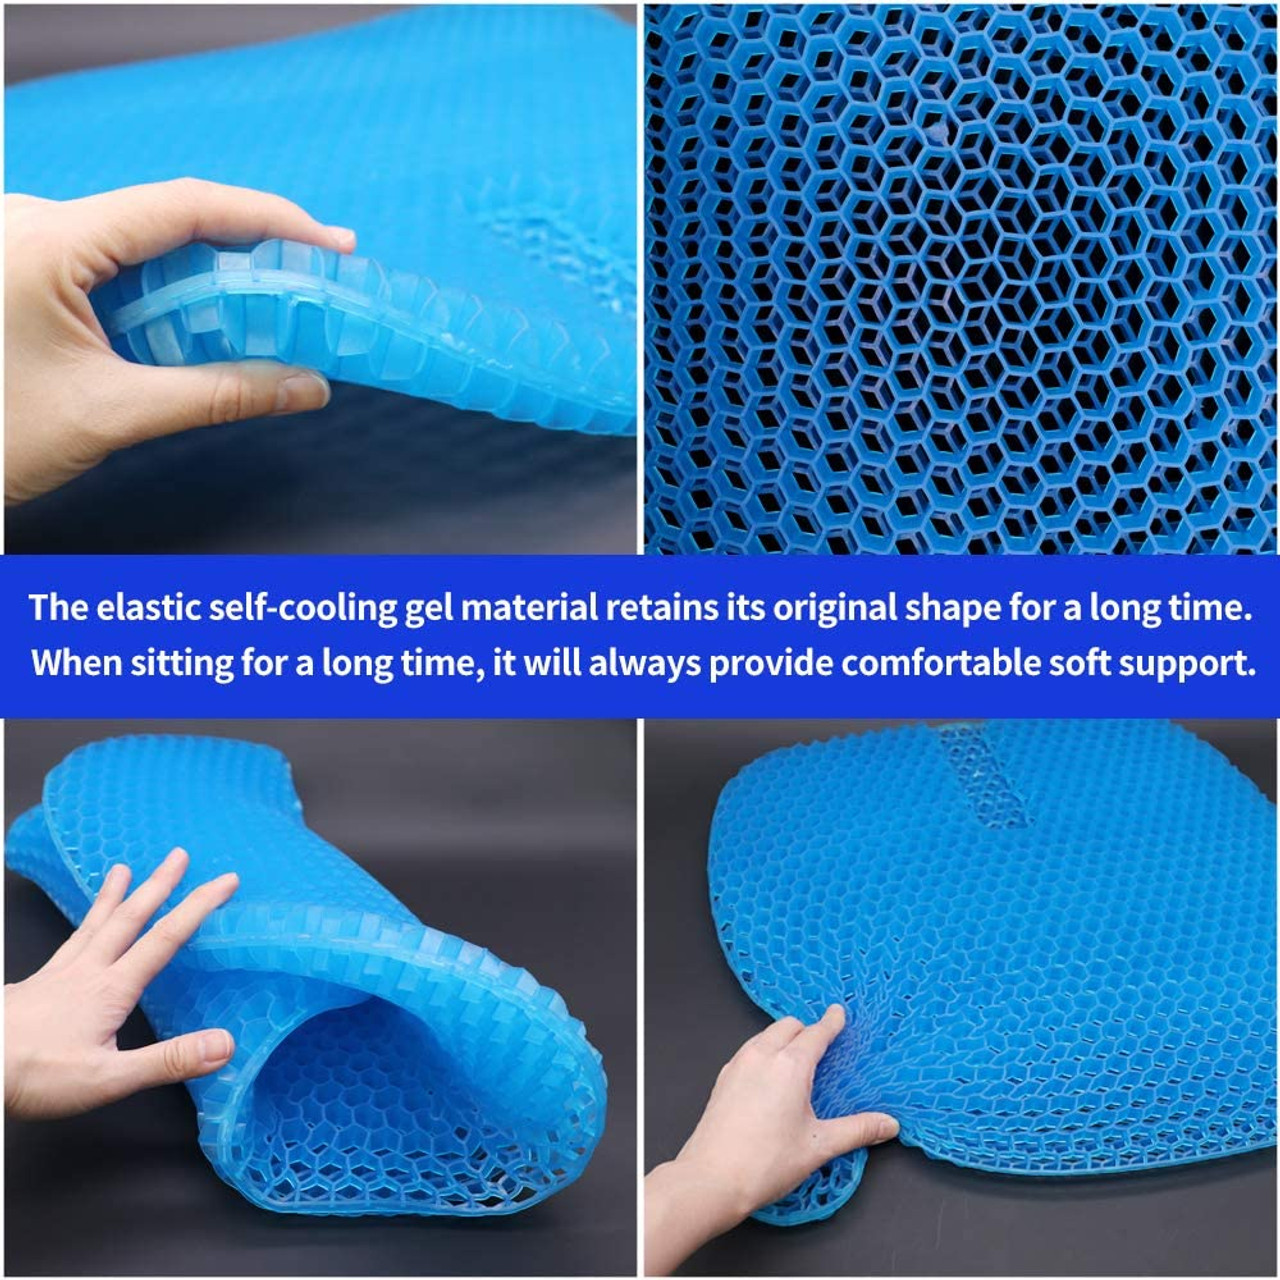 EGG SITTER Review & Testing : Cushion Soft Breathable Honeycomb Pillow 